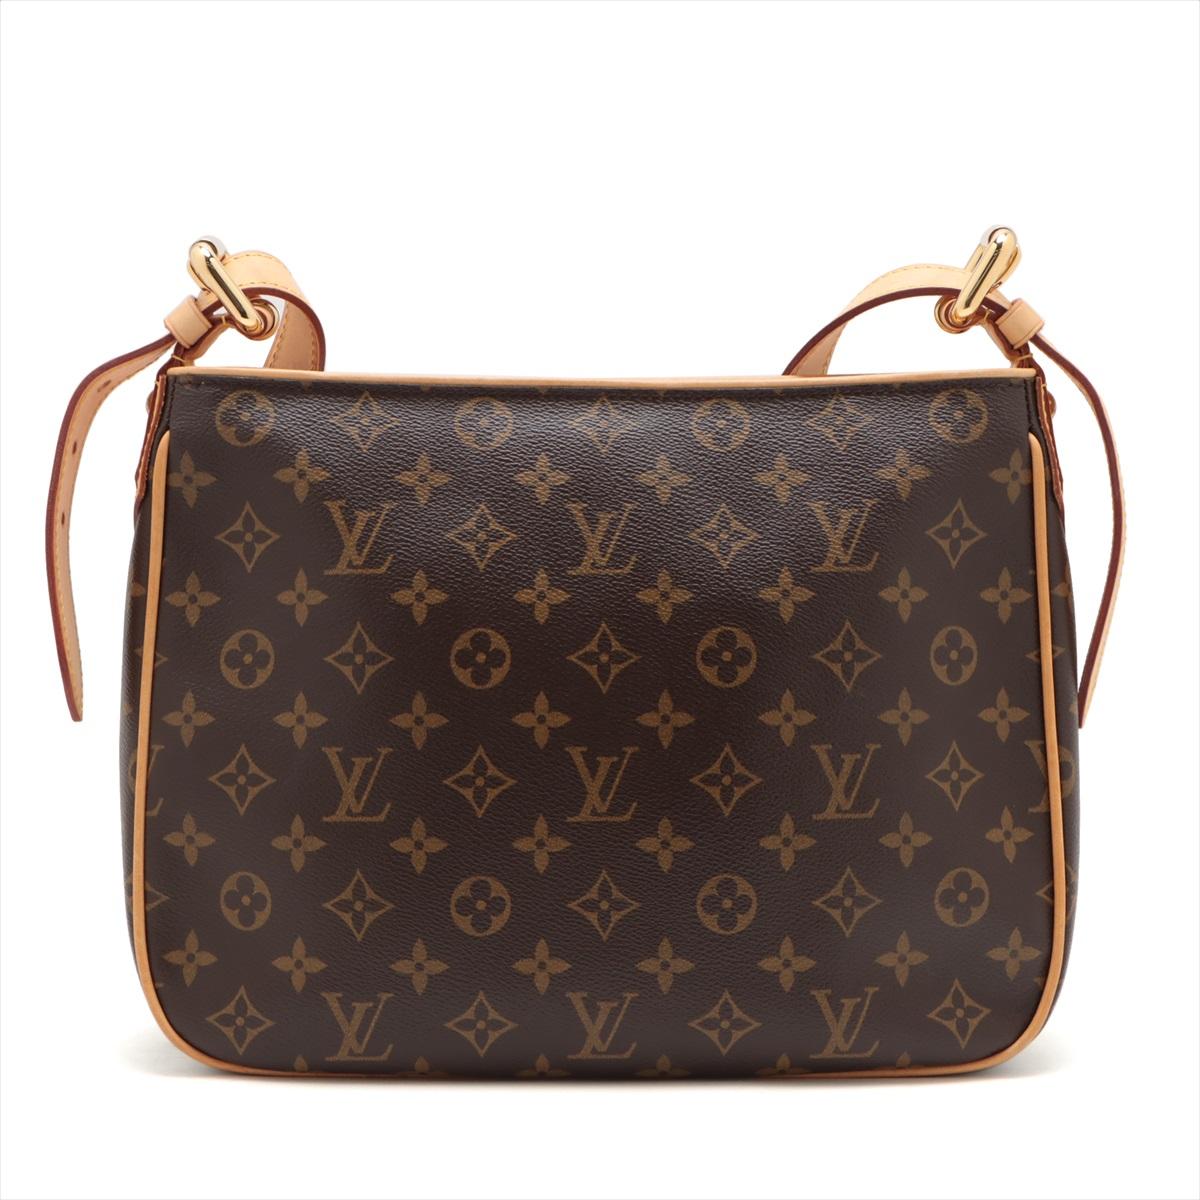 Louis Vuitton Monogram Hudson GM Shoulder Bag In Good Condition For Sale In Indianapolis, IN